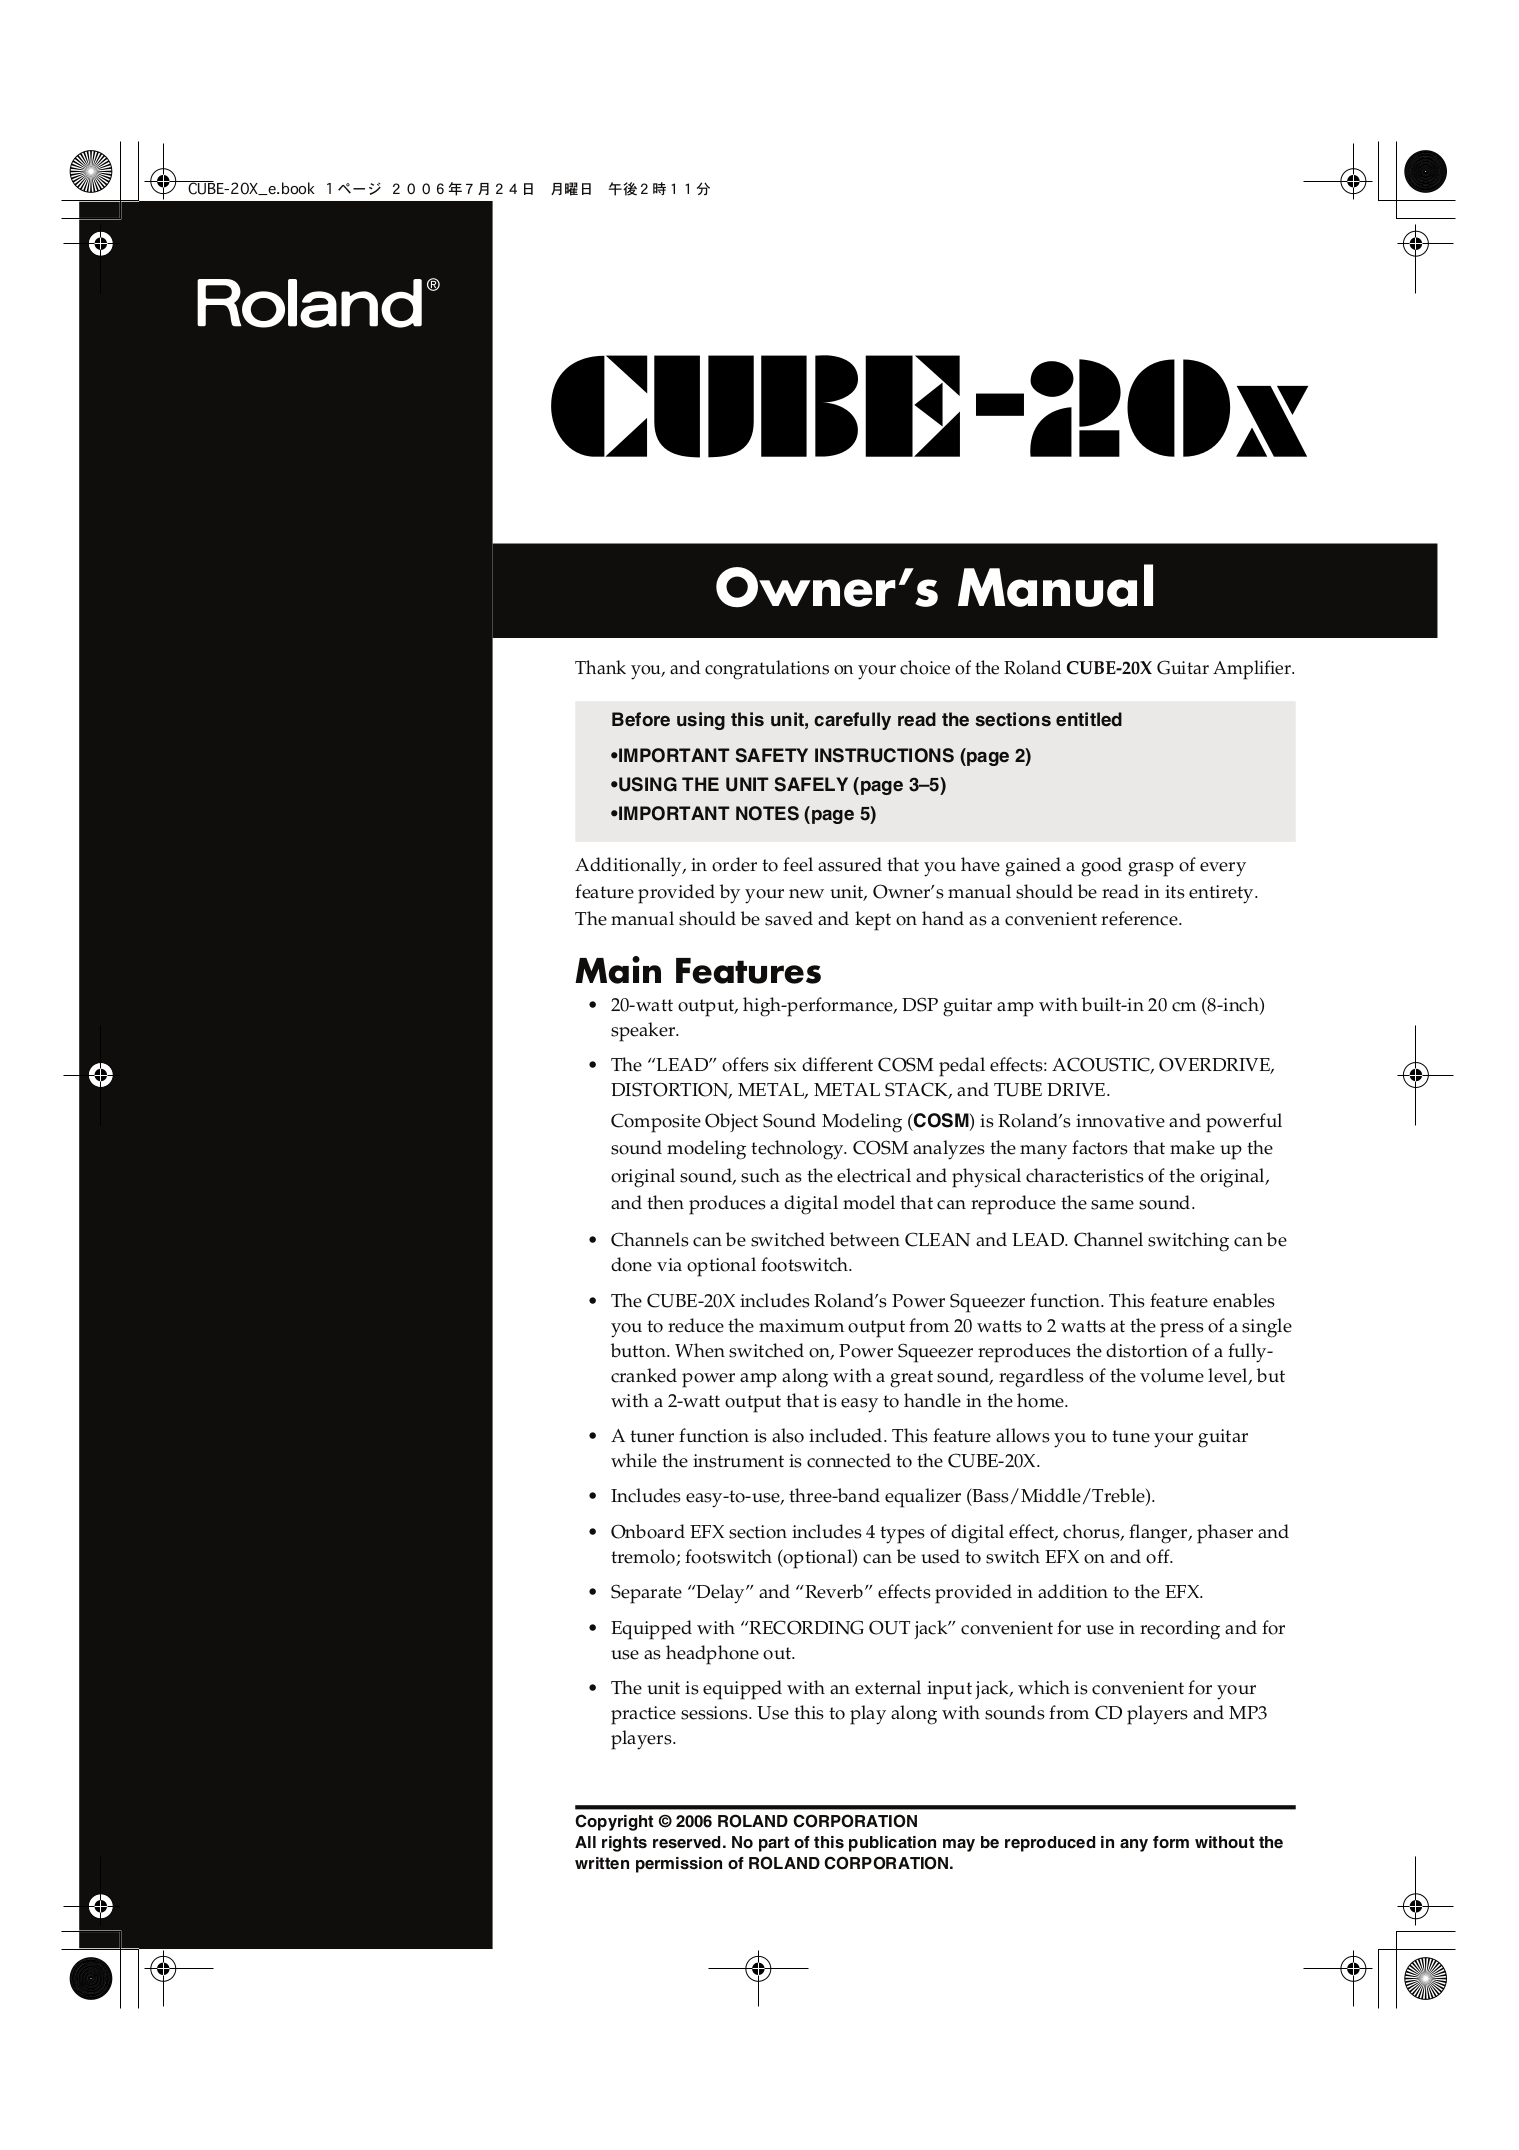 Download free pdf for Roland CUBE-20x Amp manual